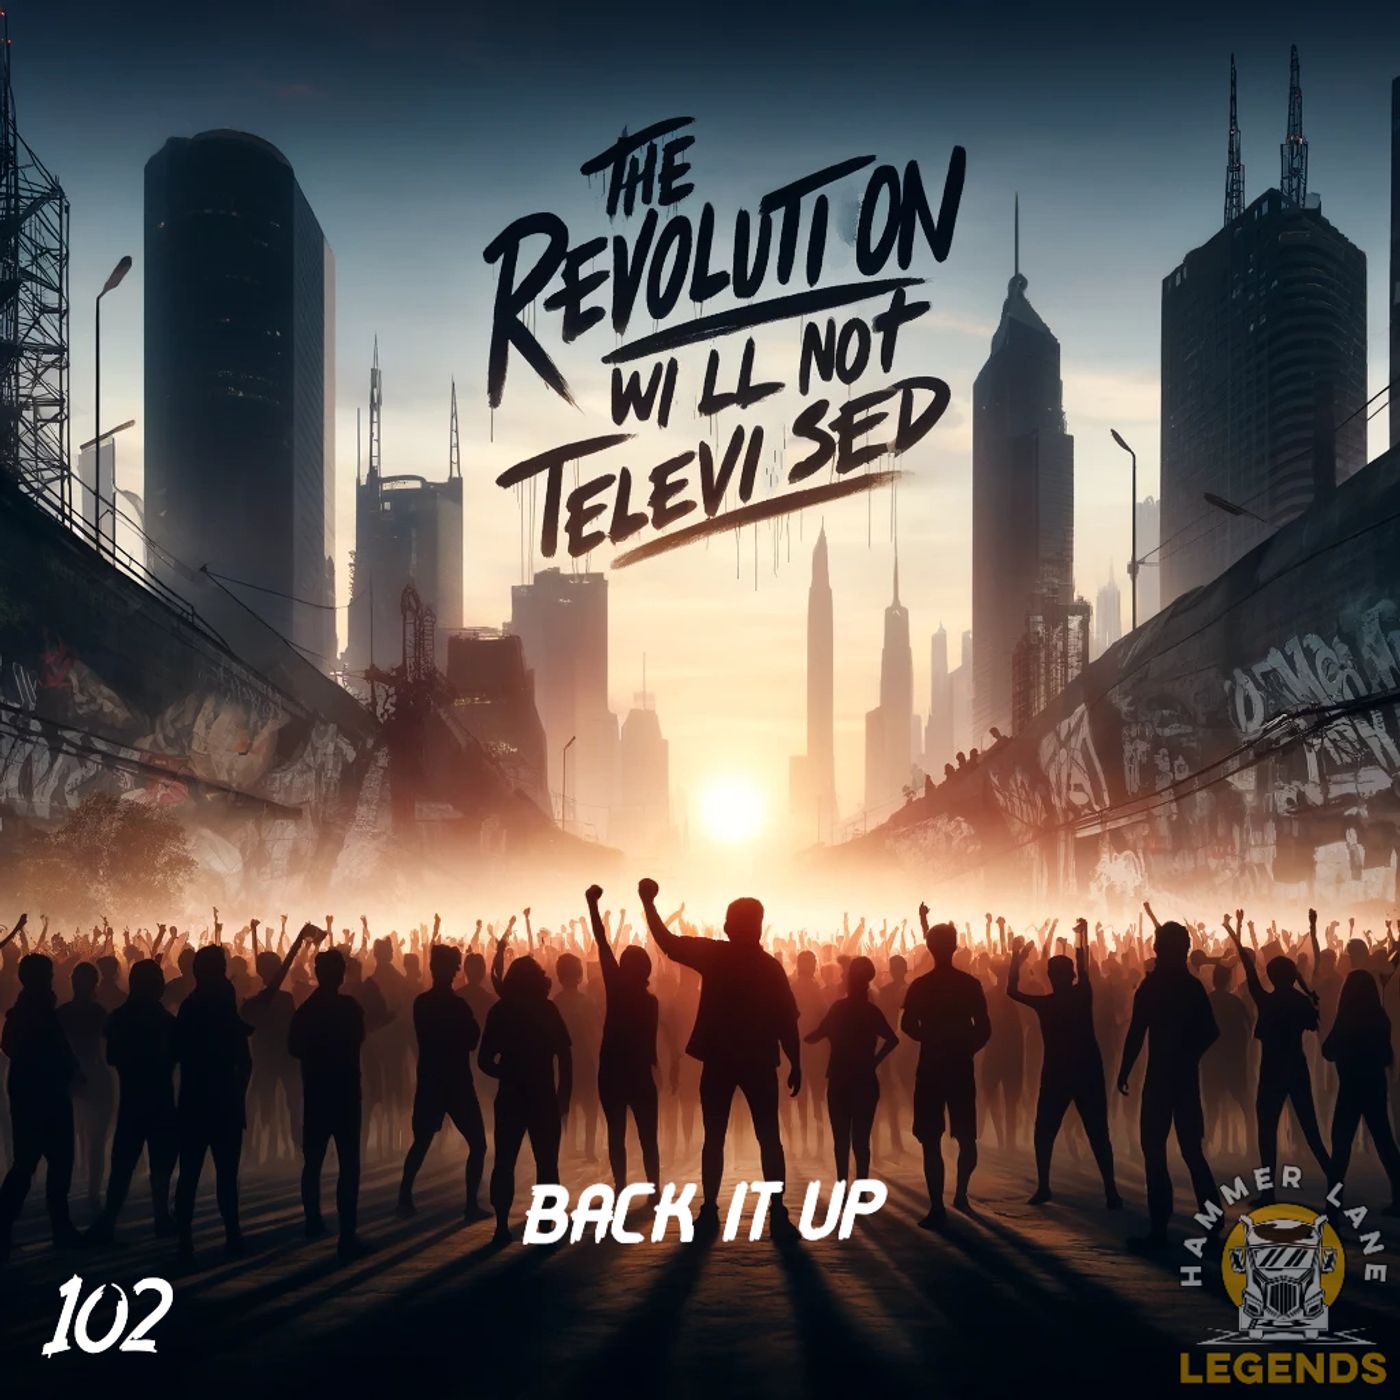 BACK IT UP | 102: The Revolution Will Not Be Televised